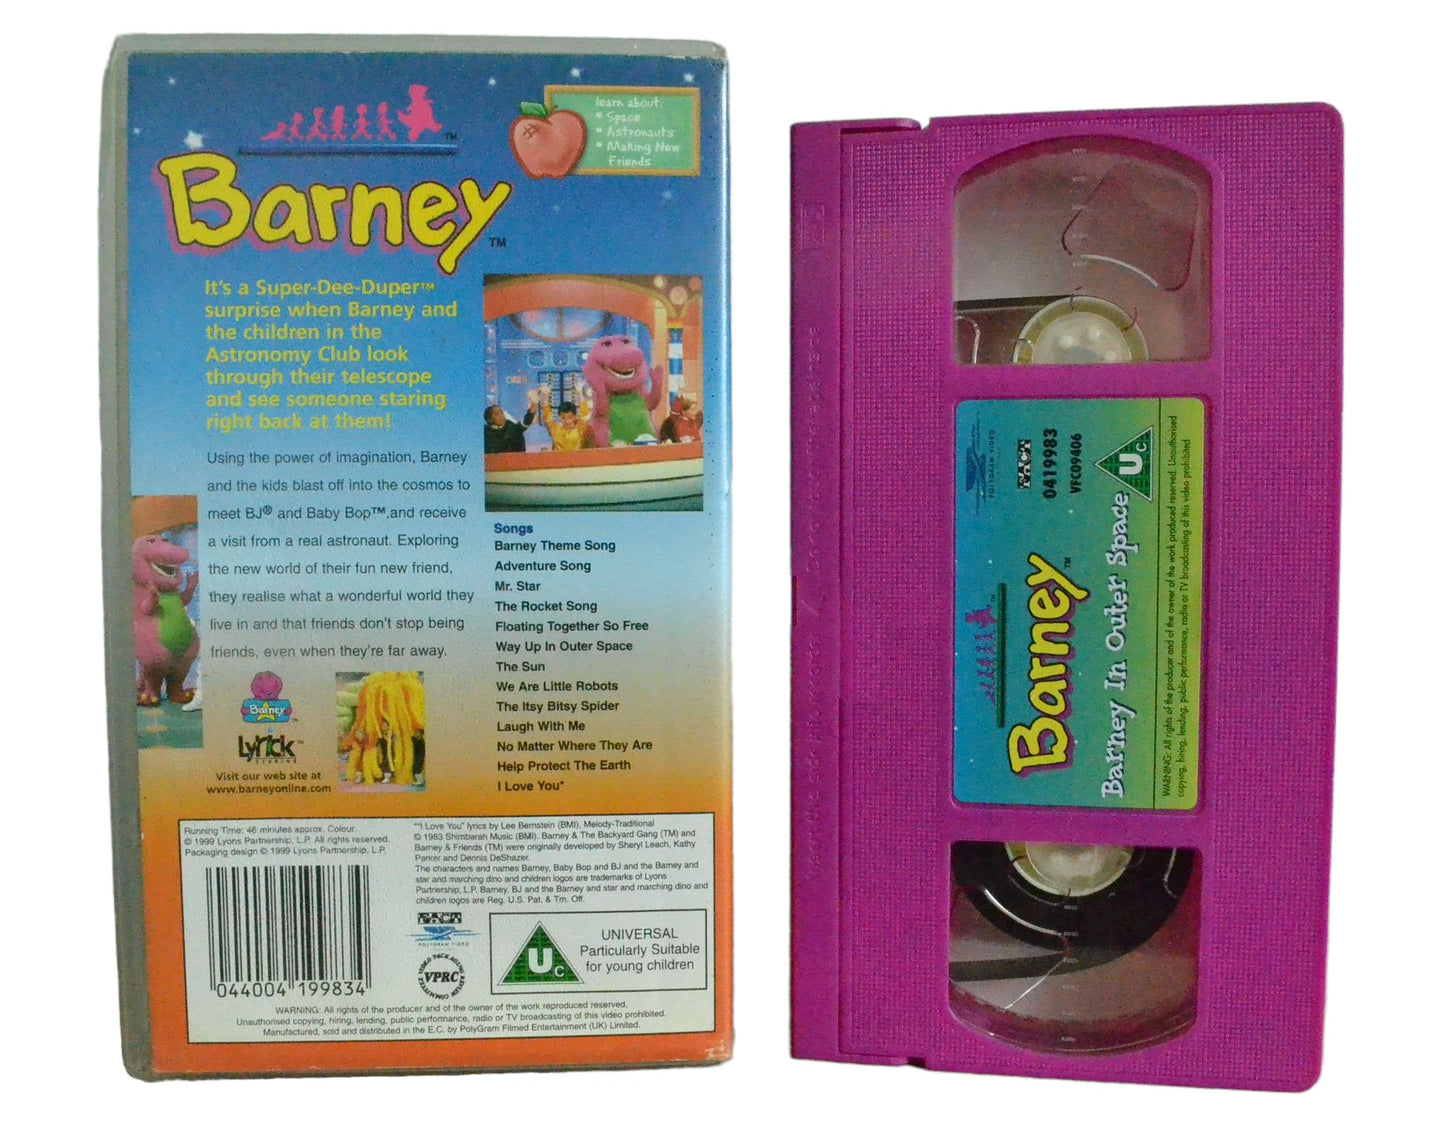 Barney In Outer Space - Polygram Video - Childrens - Pal VHS-